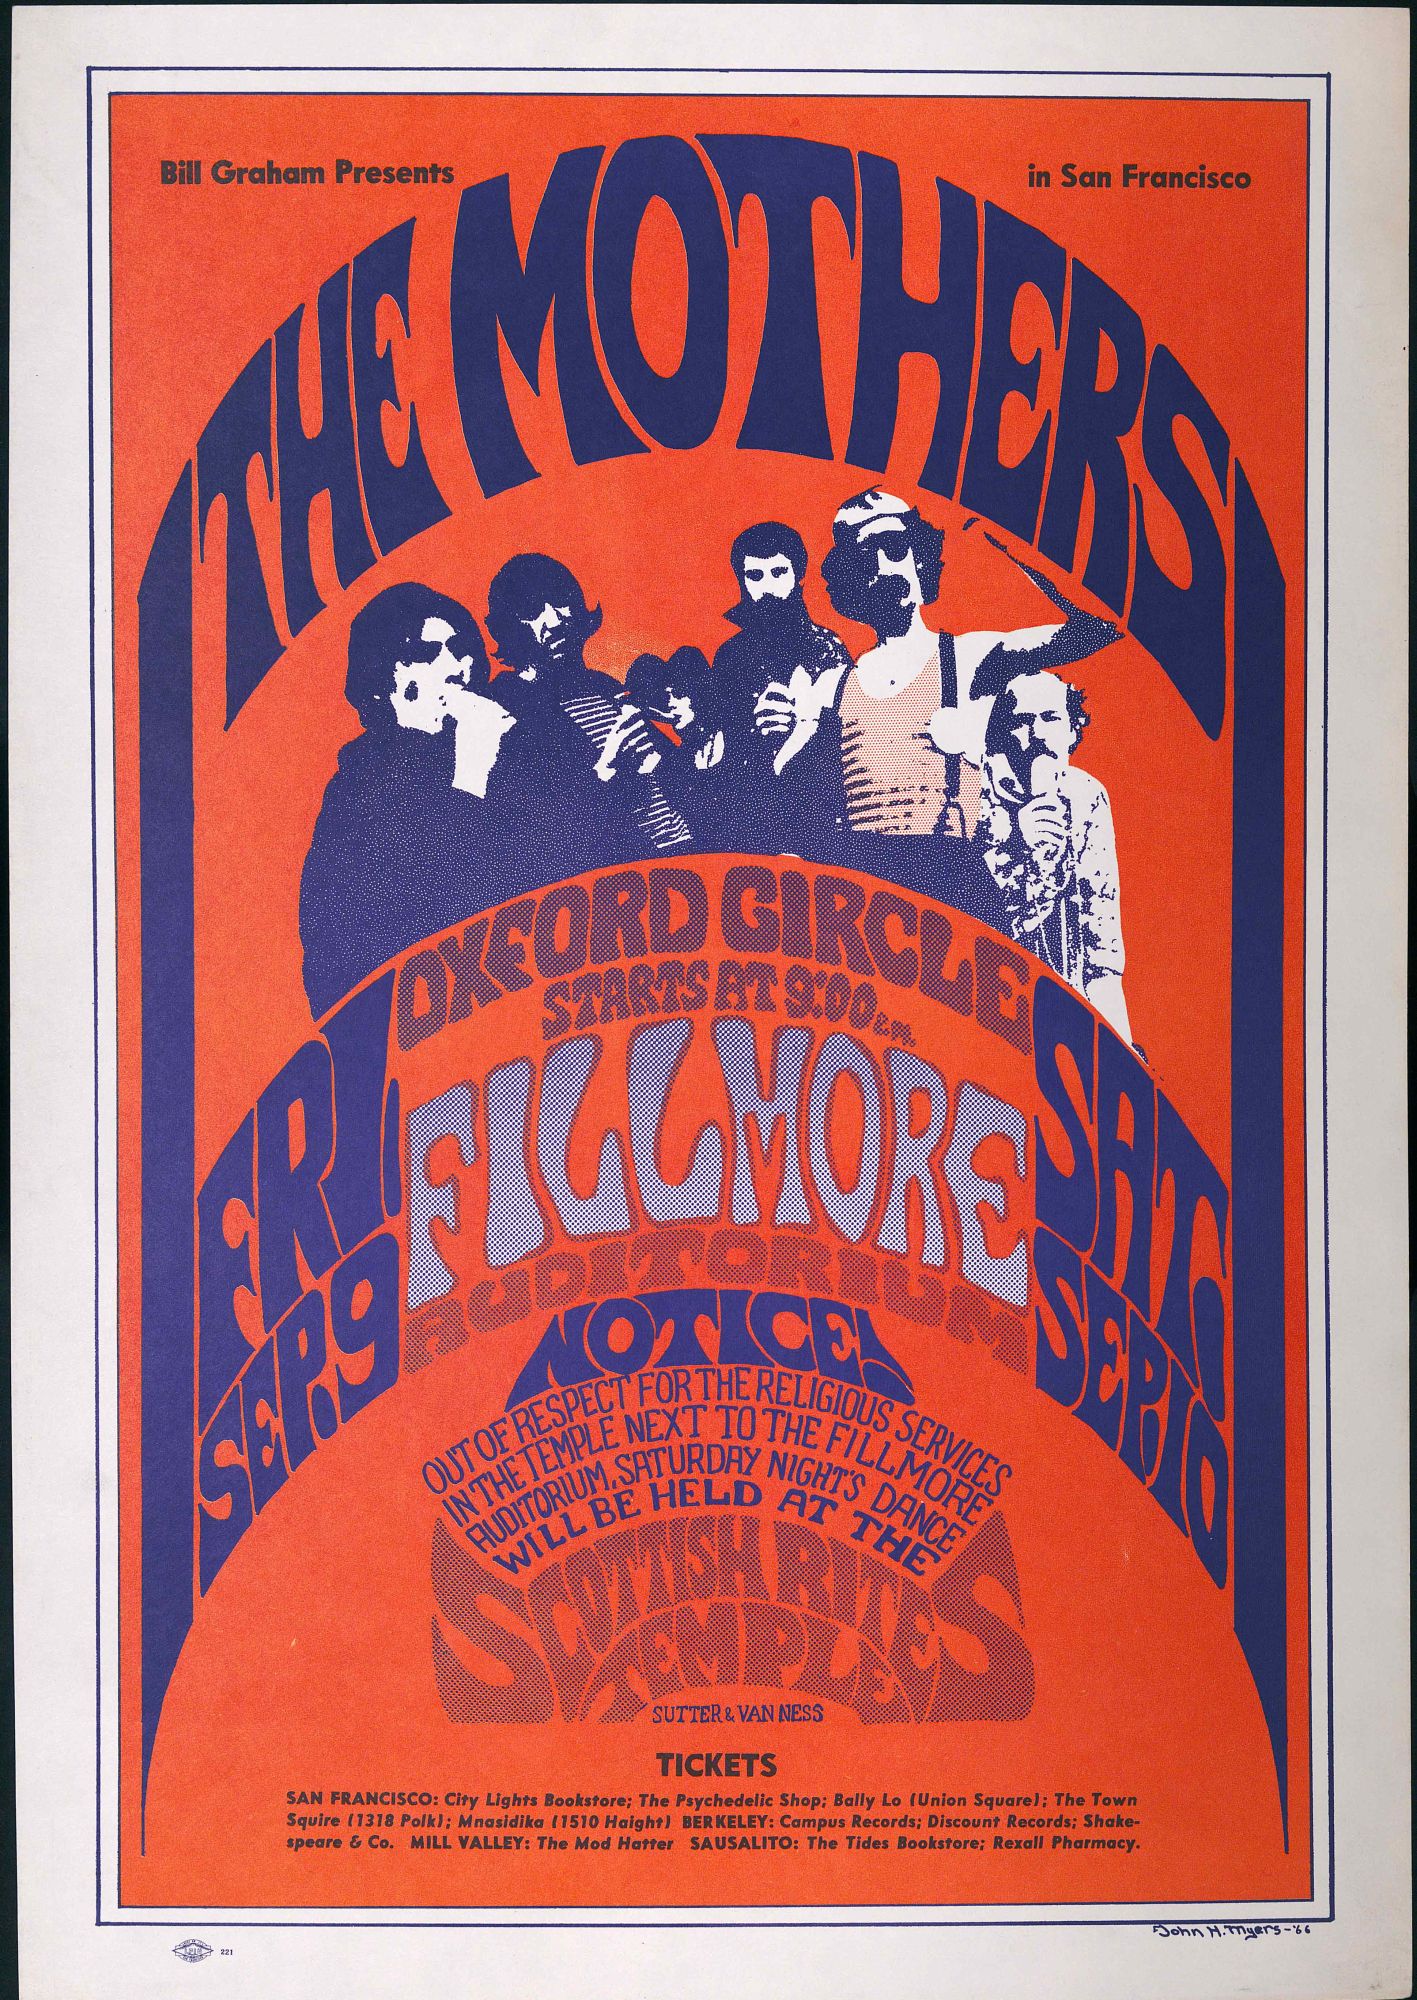 Original Concert Poster: Mothers, Oxford Circle September 9-10, 1966, Mothers, Oxford Circle, Bill Graham, John H. Myers